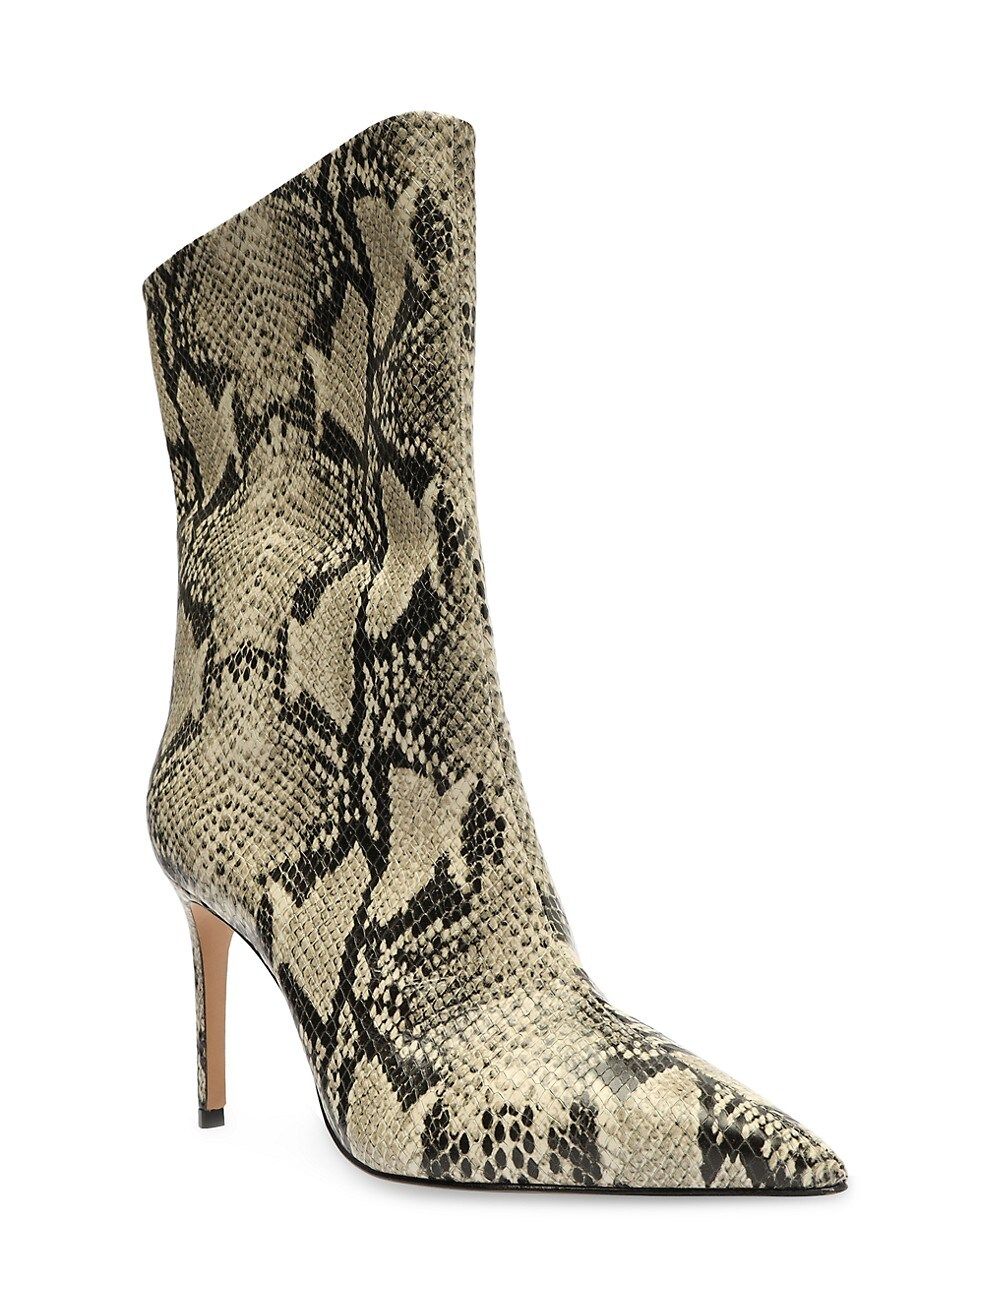 Mary Snake-Embossed Leather Short Boots | Saks Fifth Avenue